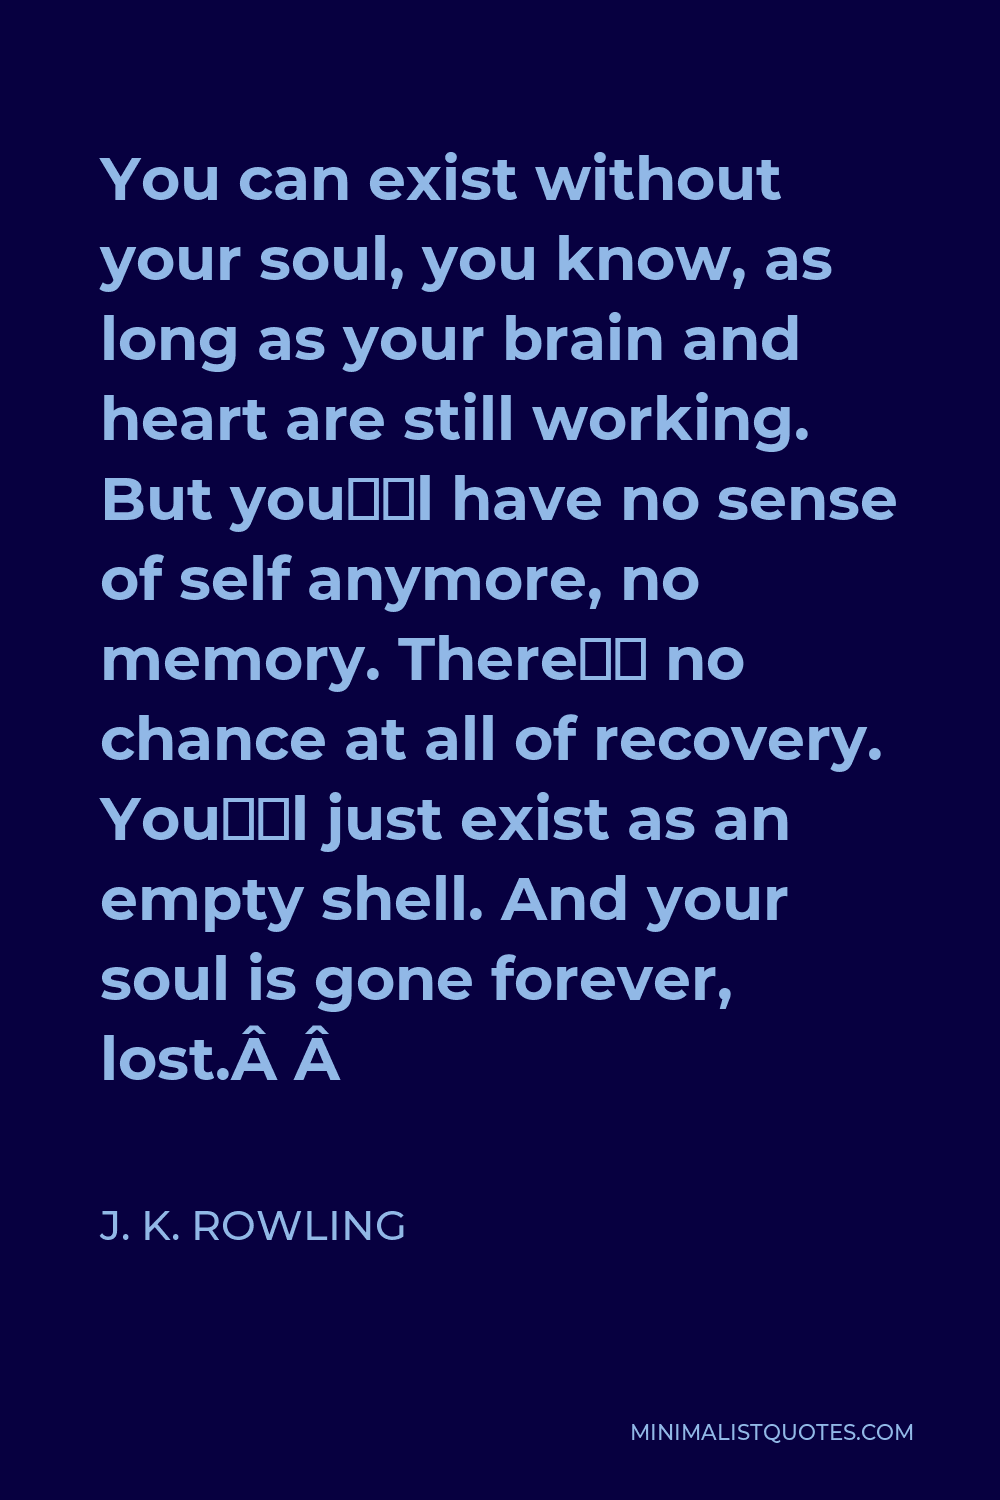 J. K. Rowling Quote - You can exist without your soul, you know, as long as your brain and heart are still working. But you’ll have no sense of self anymore, no memory. There’s no chance at all of recovery. You’ll just exist as an empty shell. And your soul is gone forever, lost.  